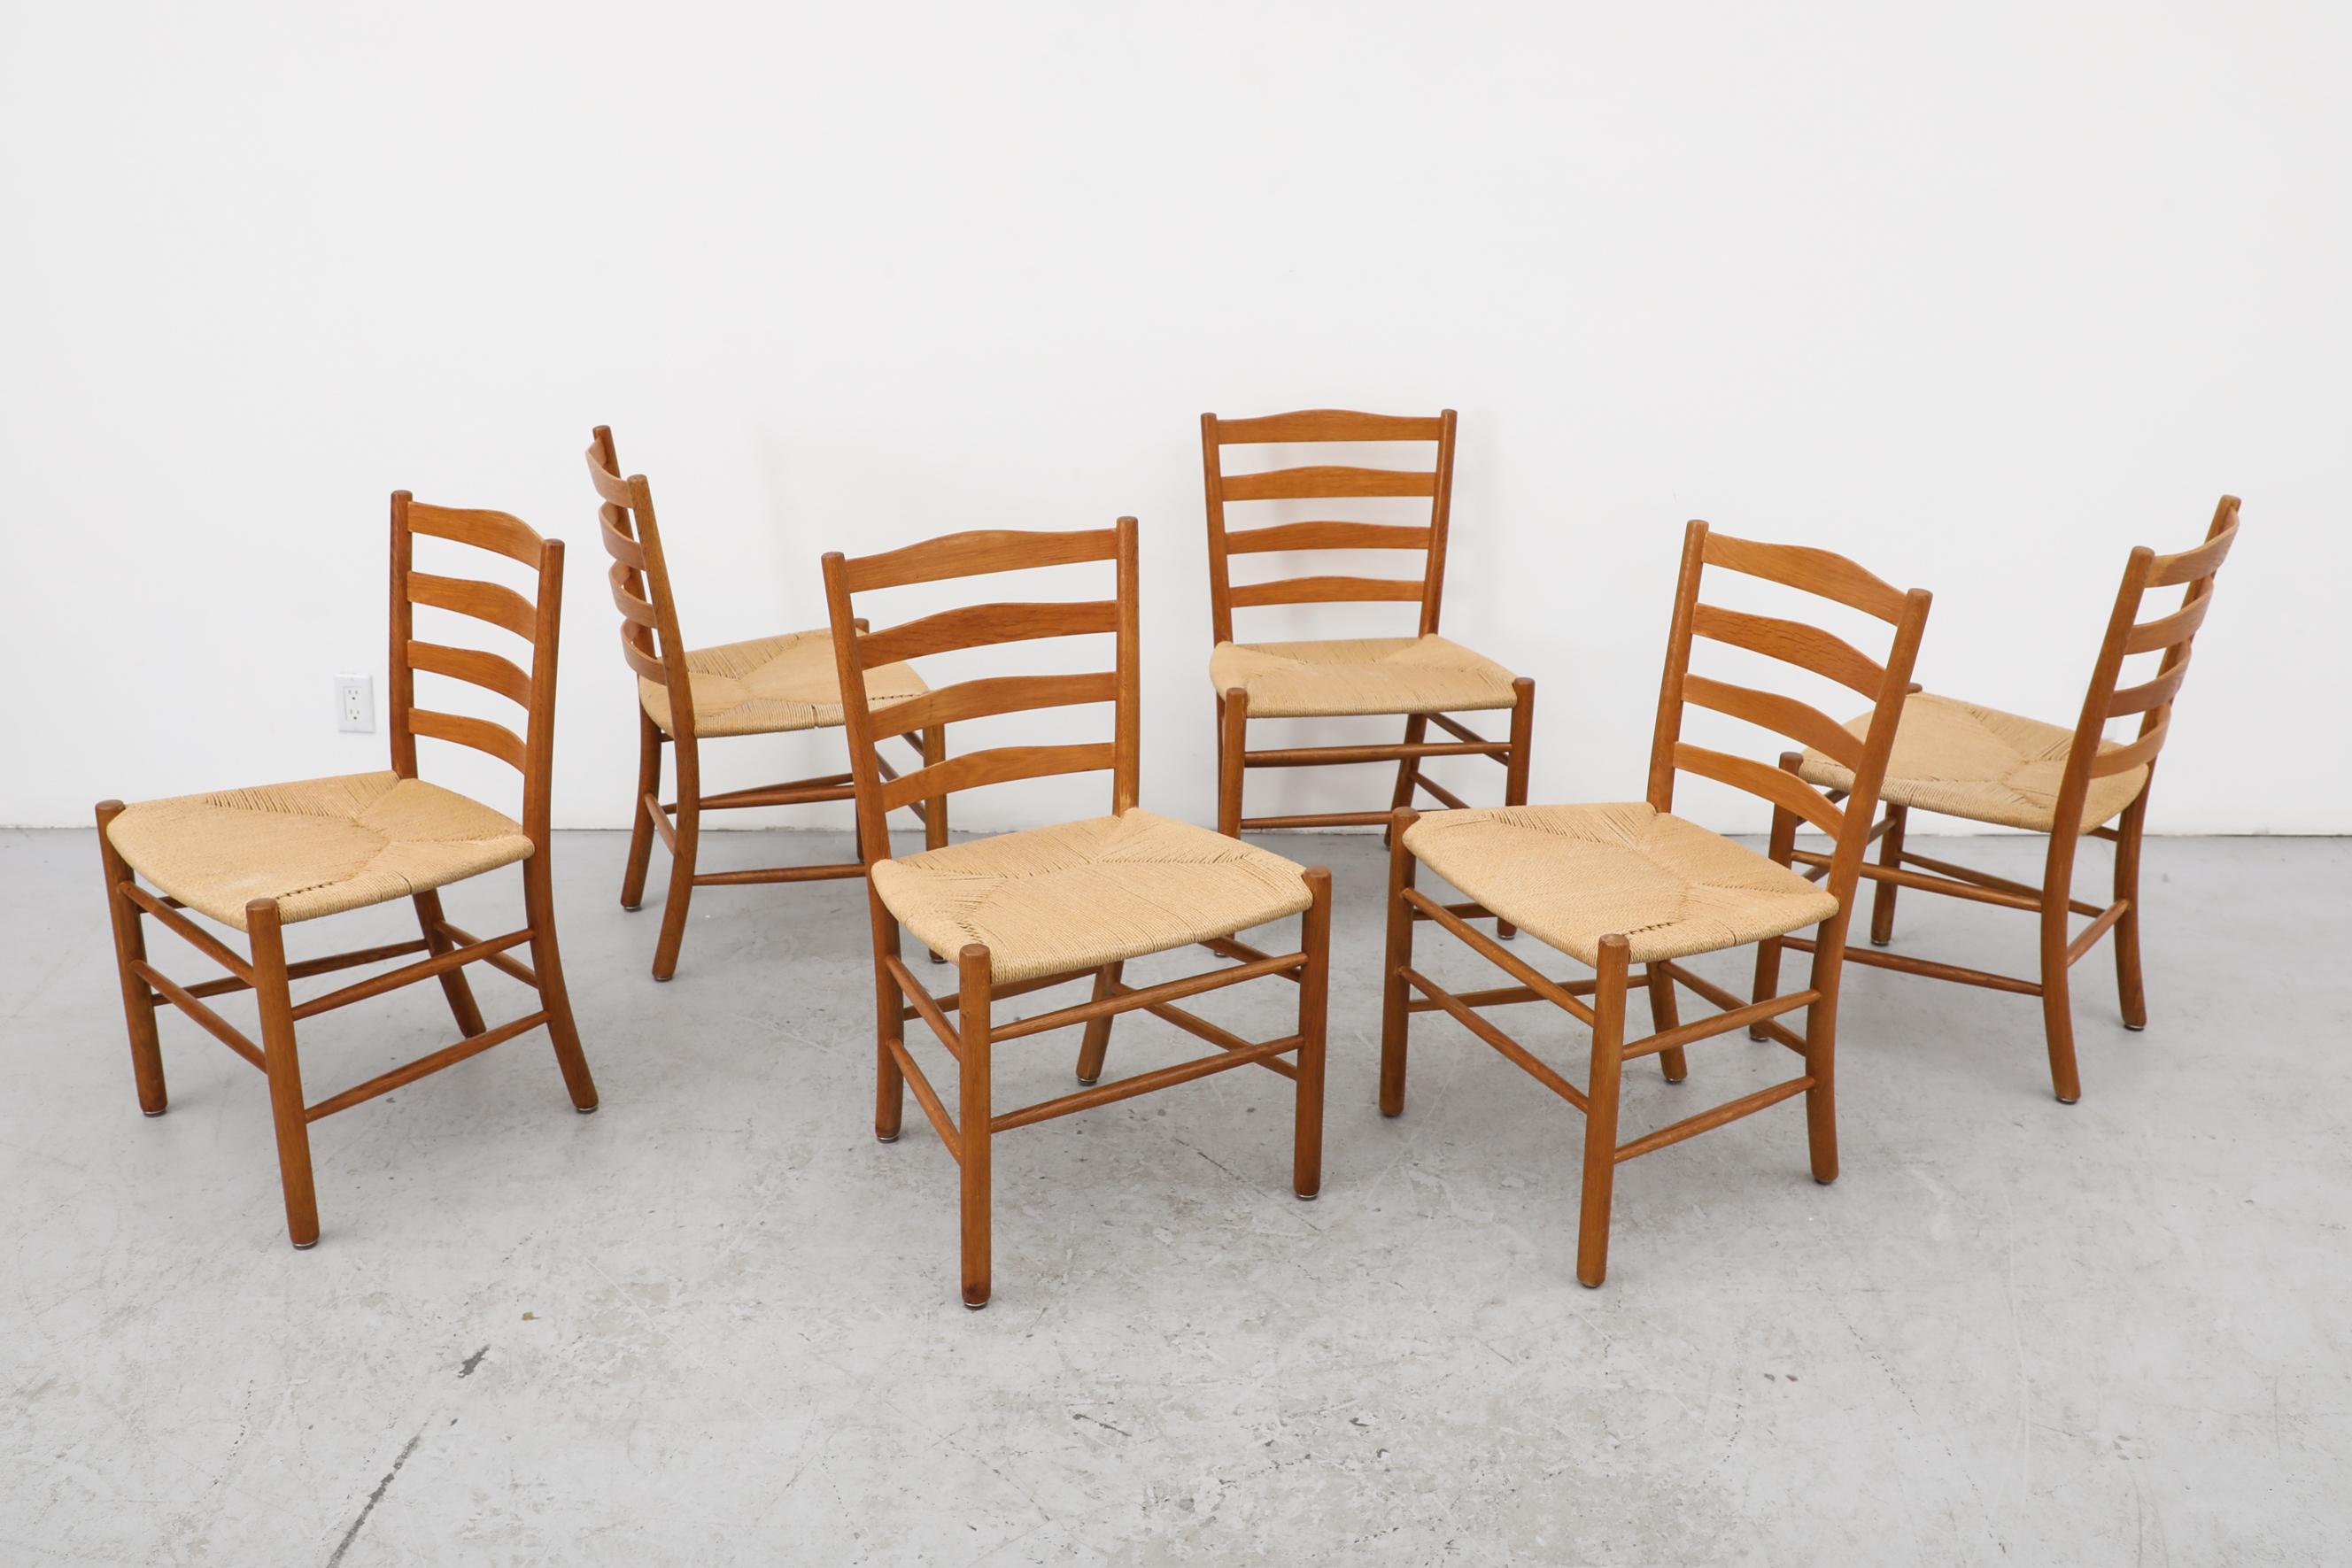 Set of 6 'Kirkestole' beechwood and papercord dining chairs by Kaare Klint for Fritz Hansen, 1960's. The “Kirkestol” or 